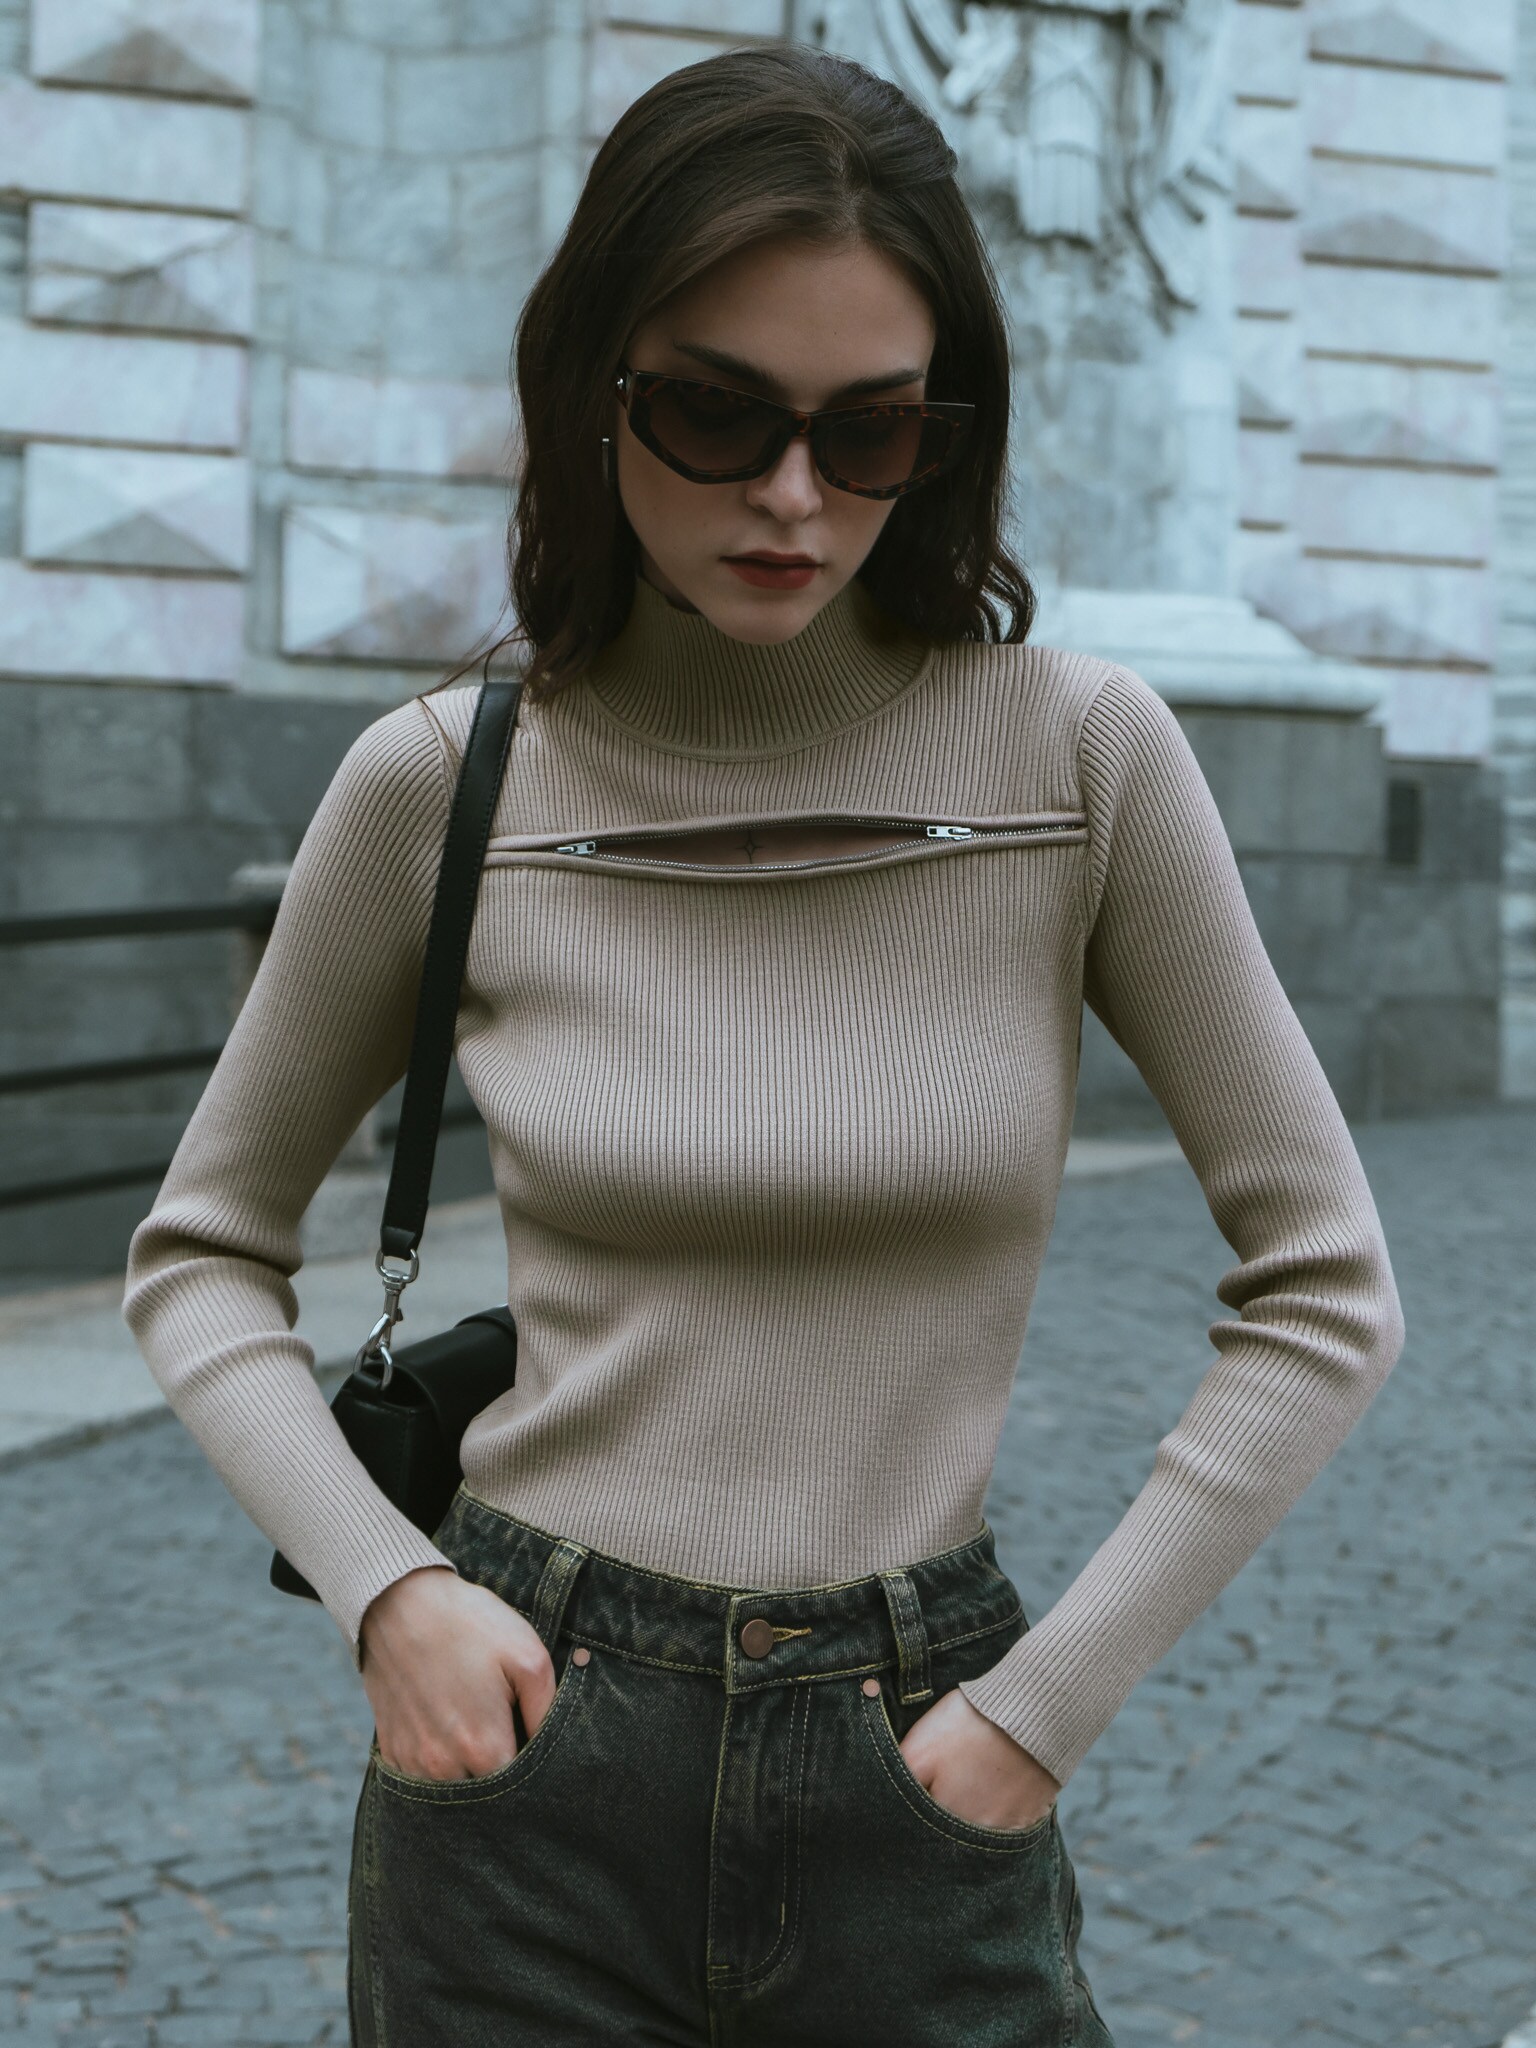 Black Belt with Turtleneck Outfits For Women (94 ideas & outfits)